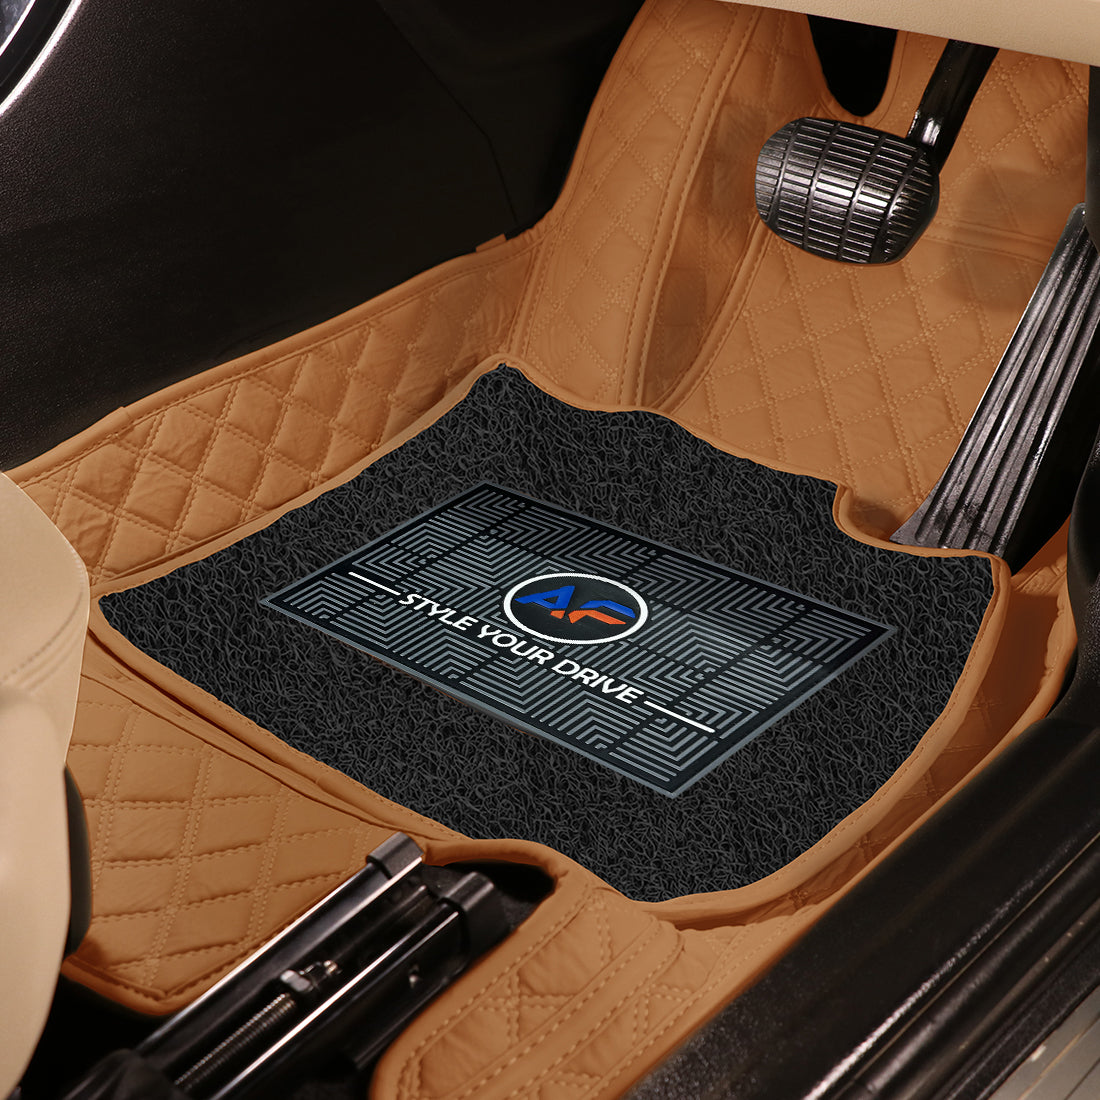 Mercedes EQS 580 4 Matic 2023-7D Luxury Car Mat, All Weather Proof, Anti-Skid, 100% Waterproof & Odorless with Unique Diamond Fish Design (24mm Luxury PU Leather, 2 Rows)